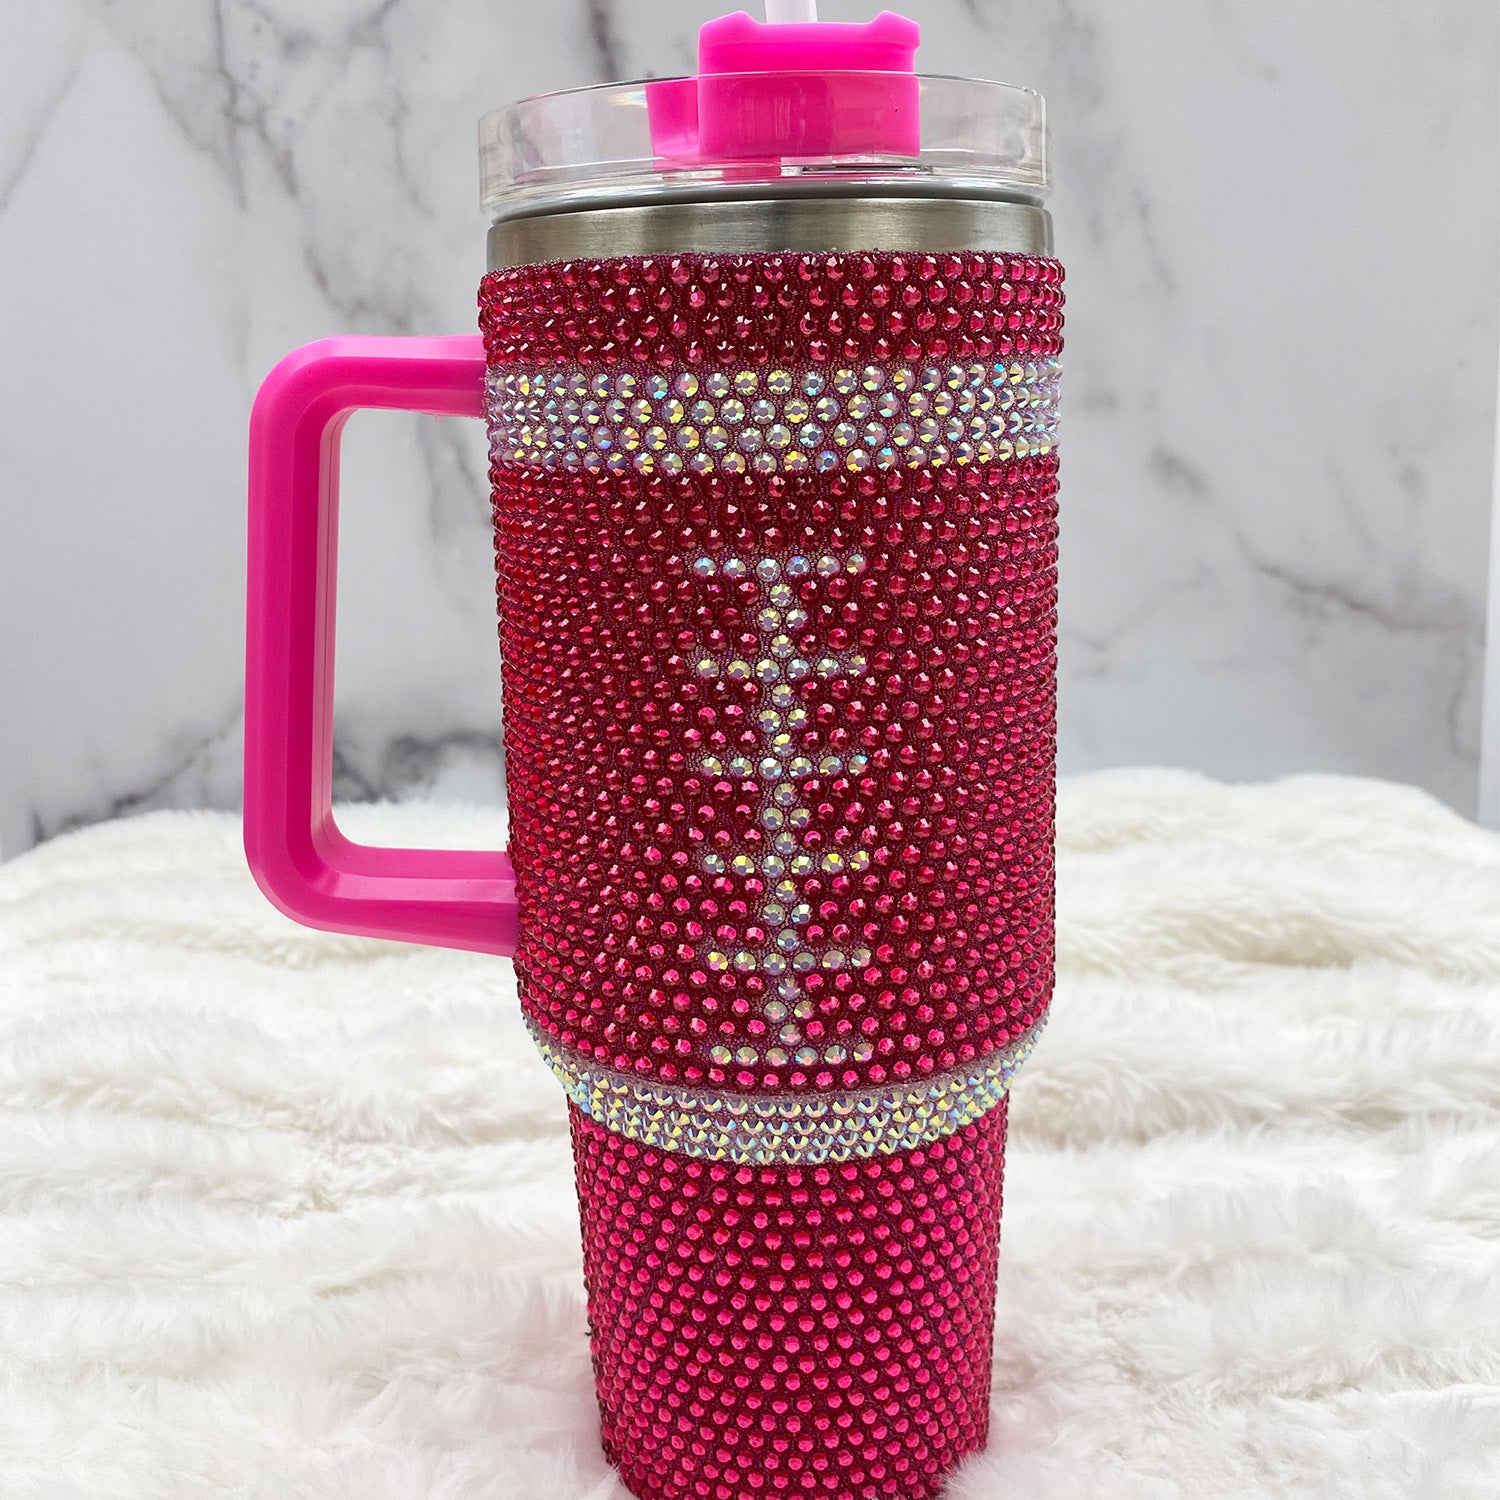 Large 40oz. Tumbler With Handle 40 Ounce Tumbler Large Cup Bridal